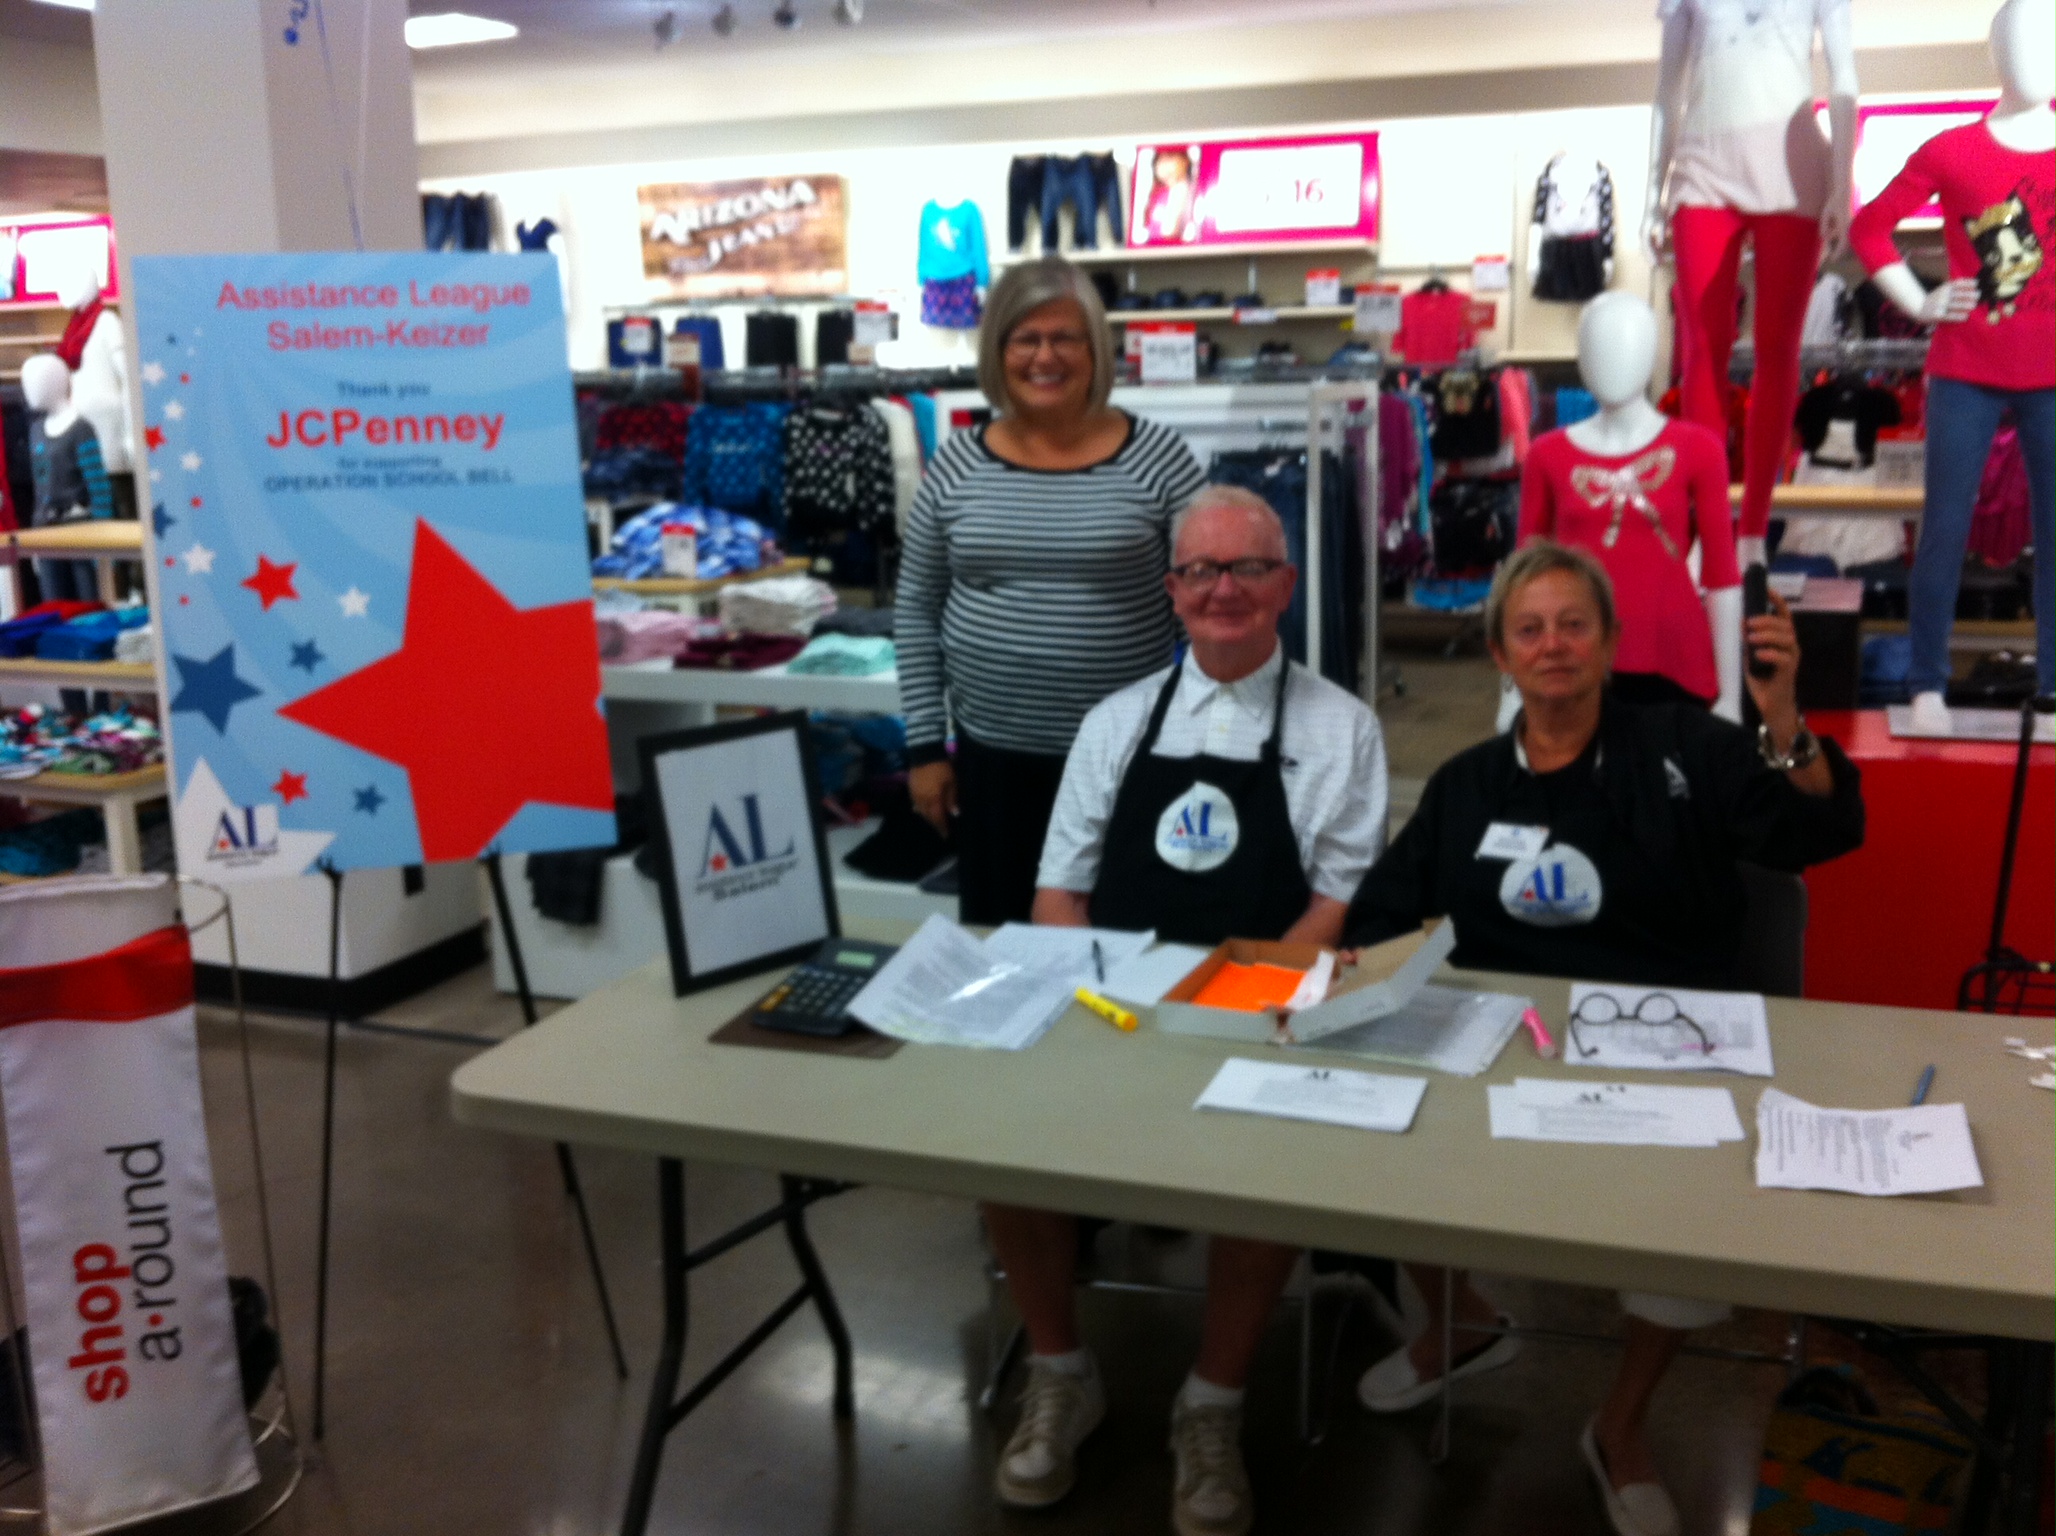 Shopping night check-in | Assistance League – Salem-Keizer